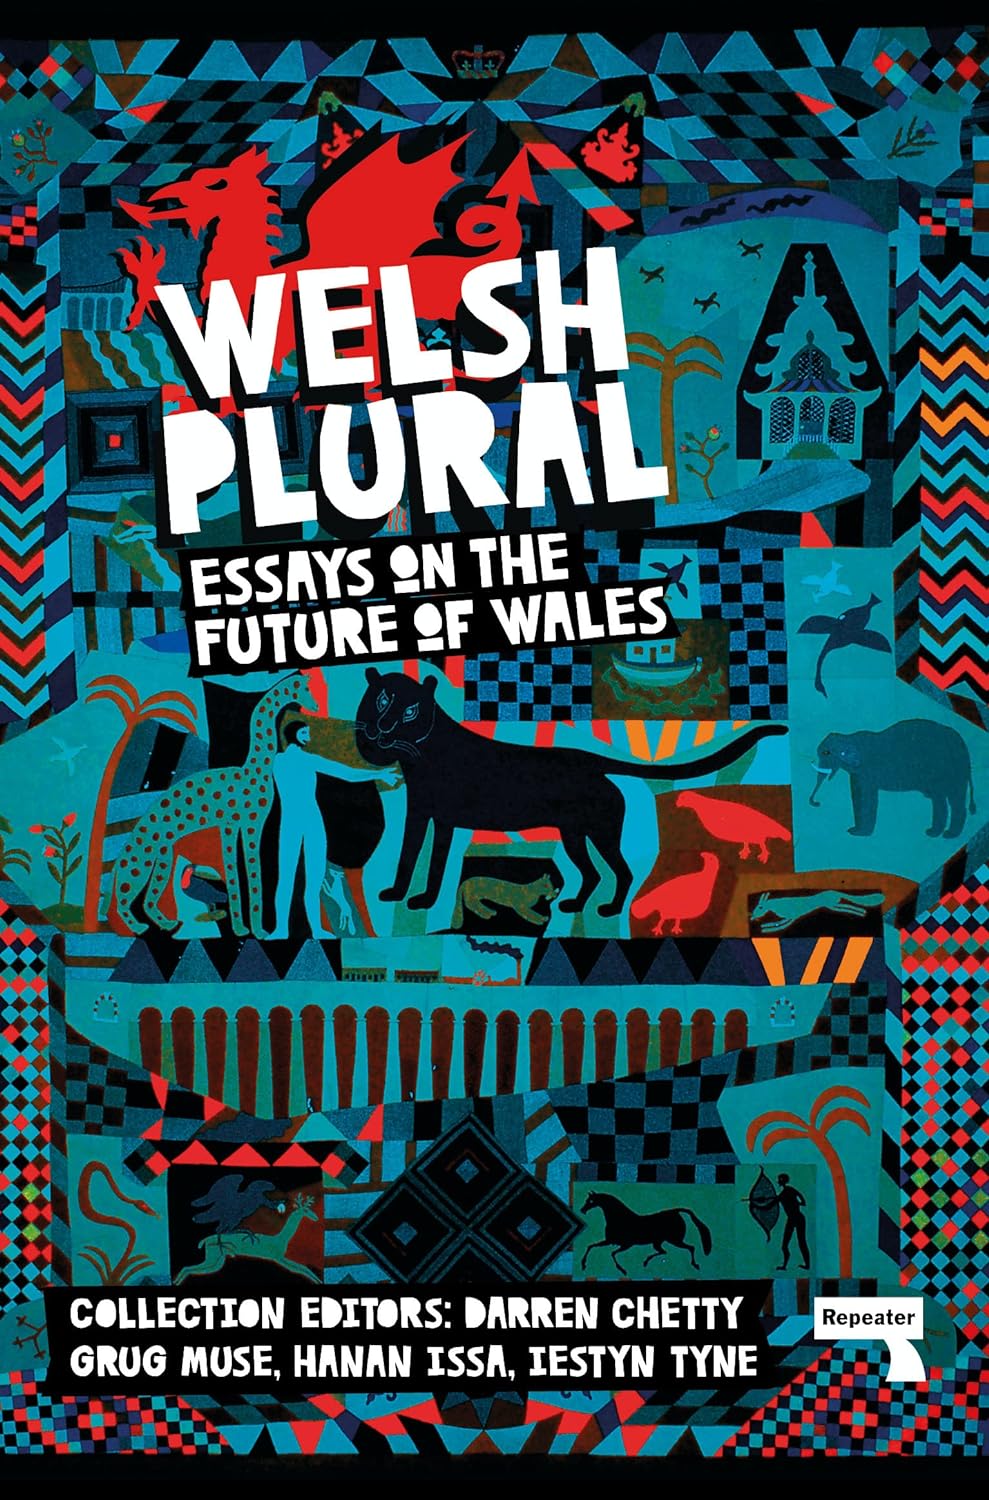 Book - Welsh (Plural): Essays on the Future of Wales - Paperback